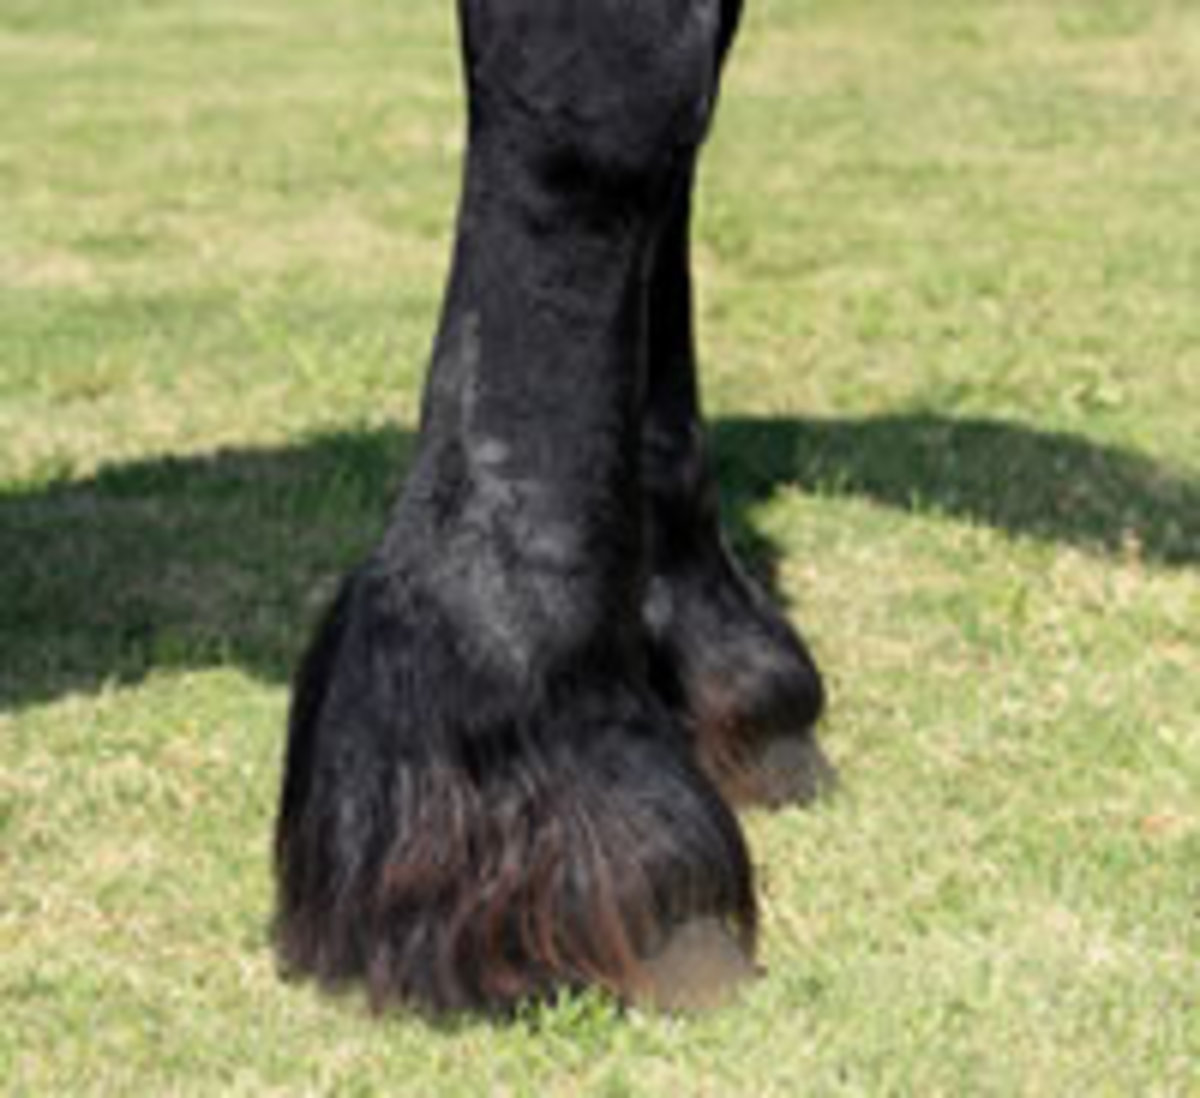 The front legs of a draft horse with heavy black feathers